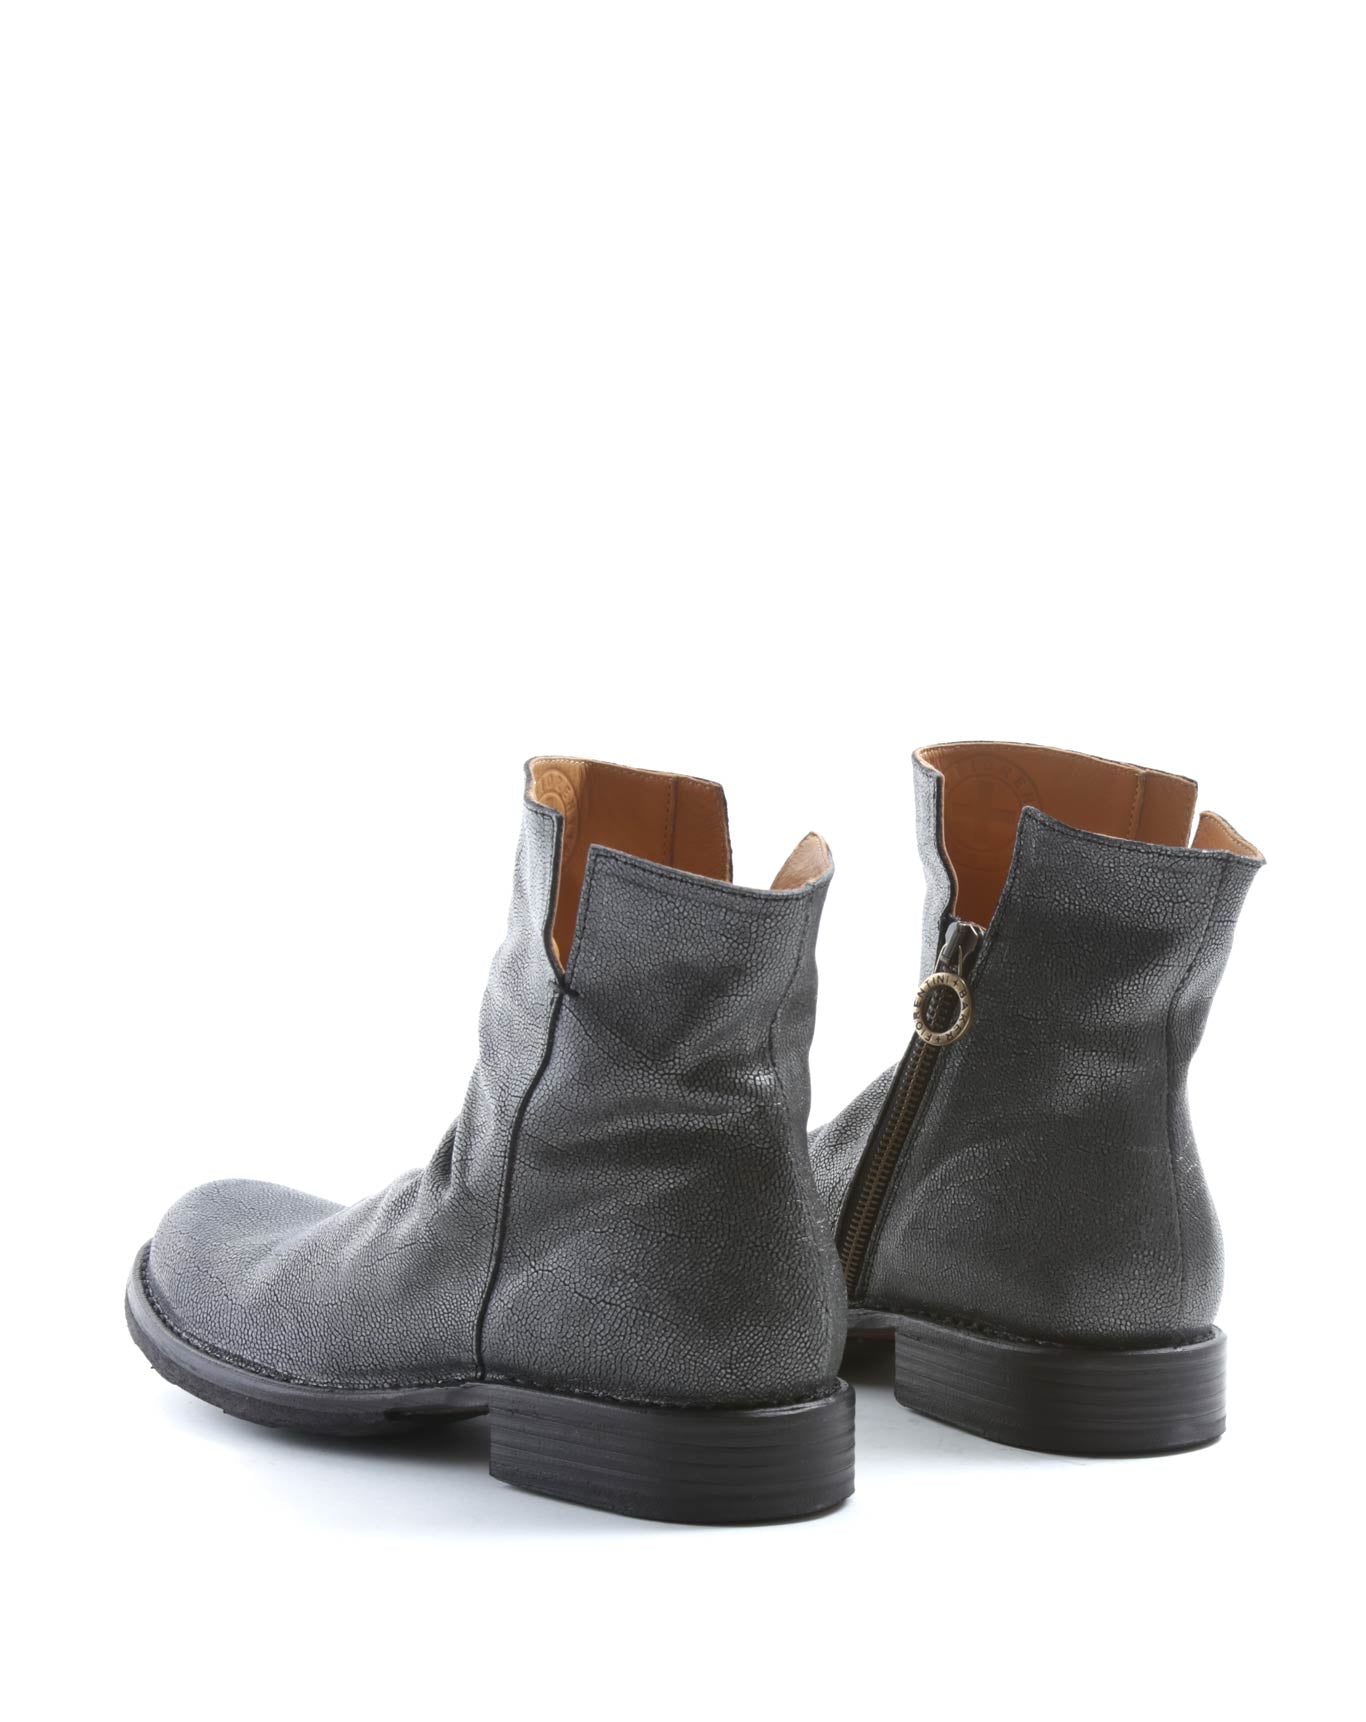 FIORENTINI + BAKER, ETERNITY ELF, Best-selling iconic boot in the FB collection since 2003. Handcrafted with natural leather by skilled artisans. Made in Italy. Made to last.